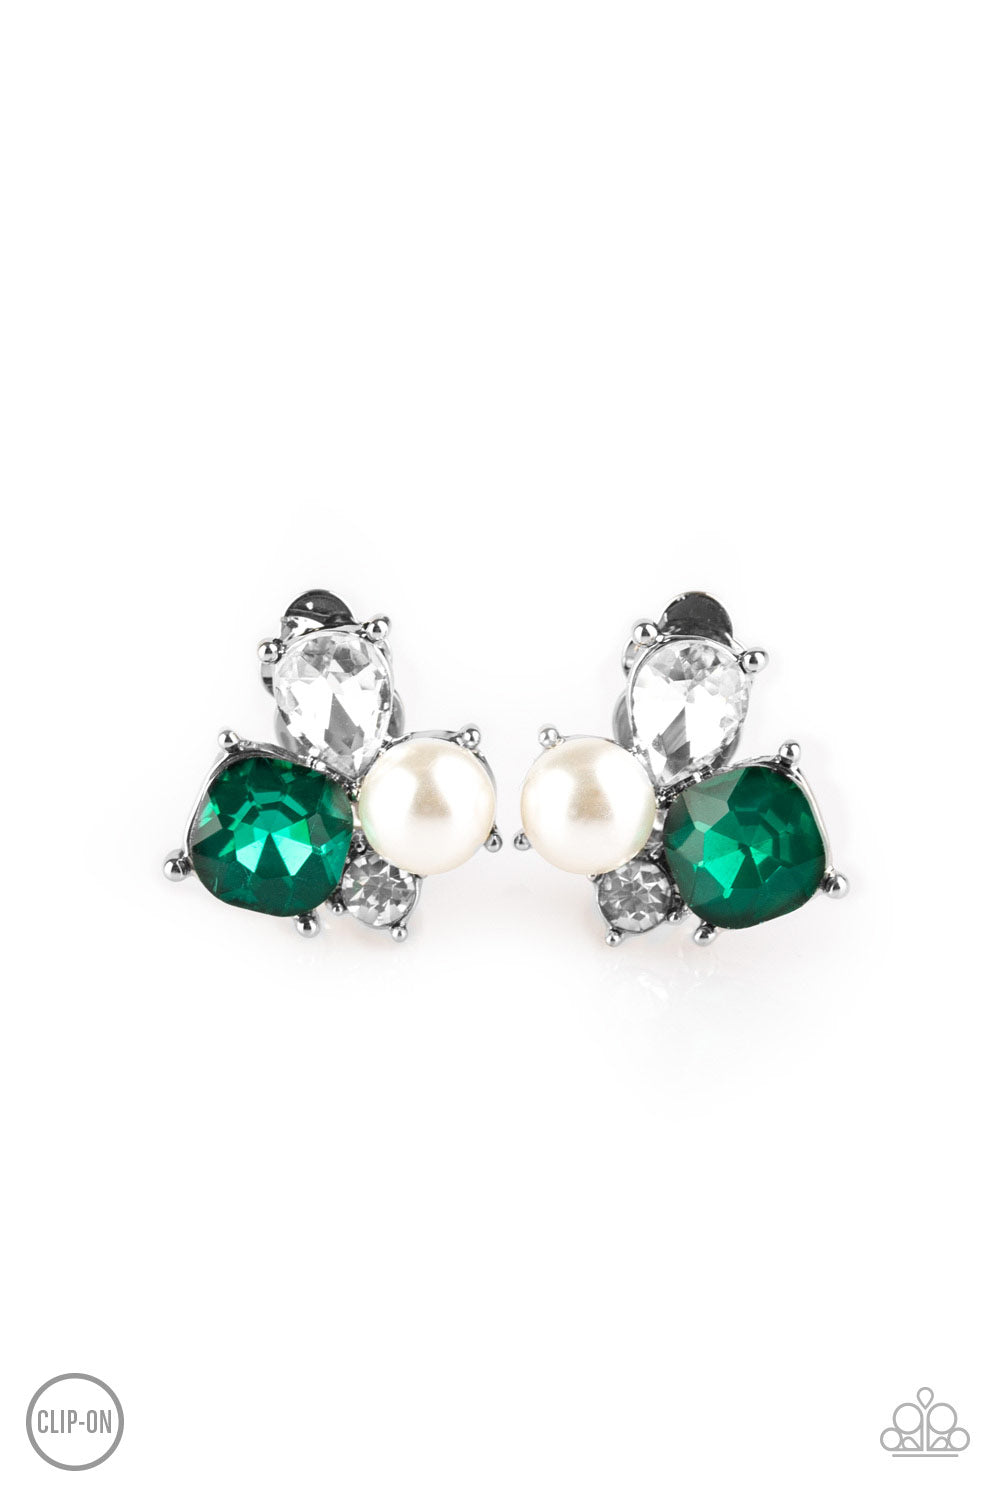 Highly High Class - green - Paparazzi CLIP ON earrings